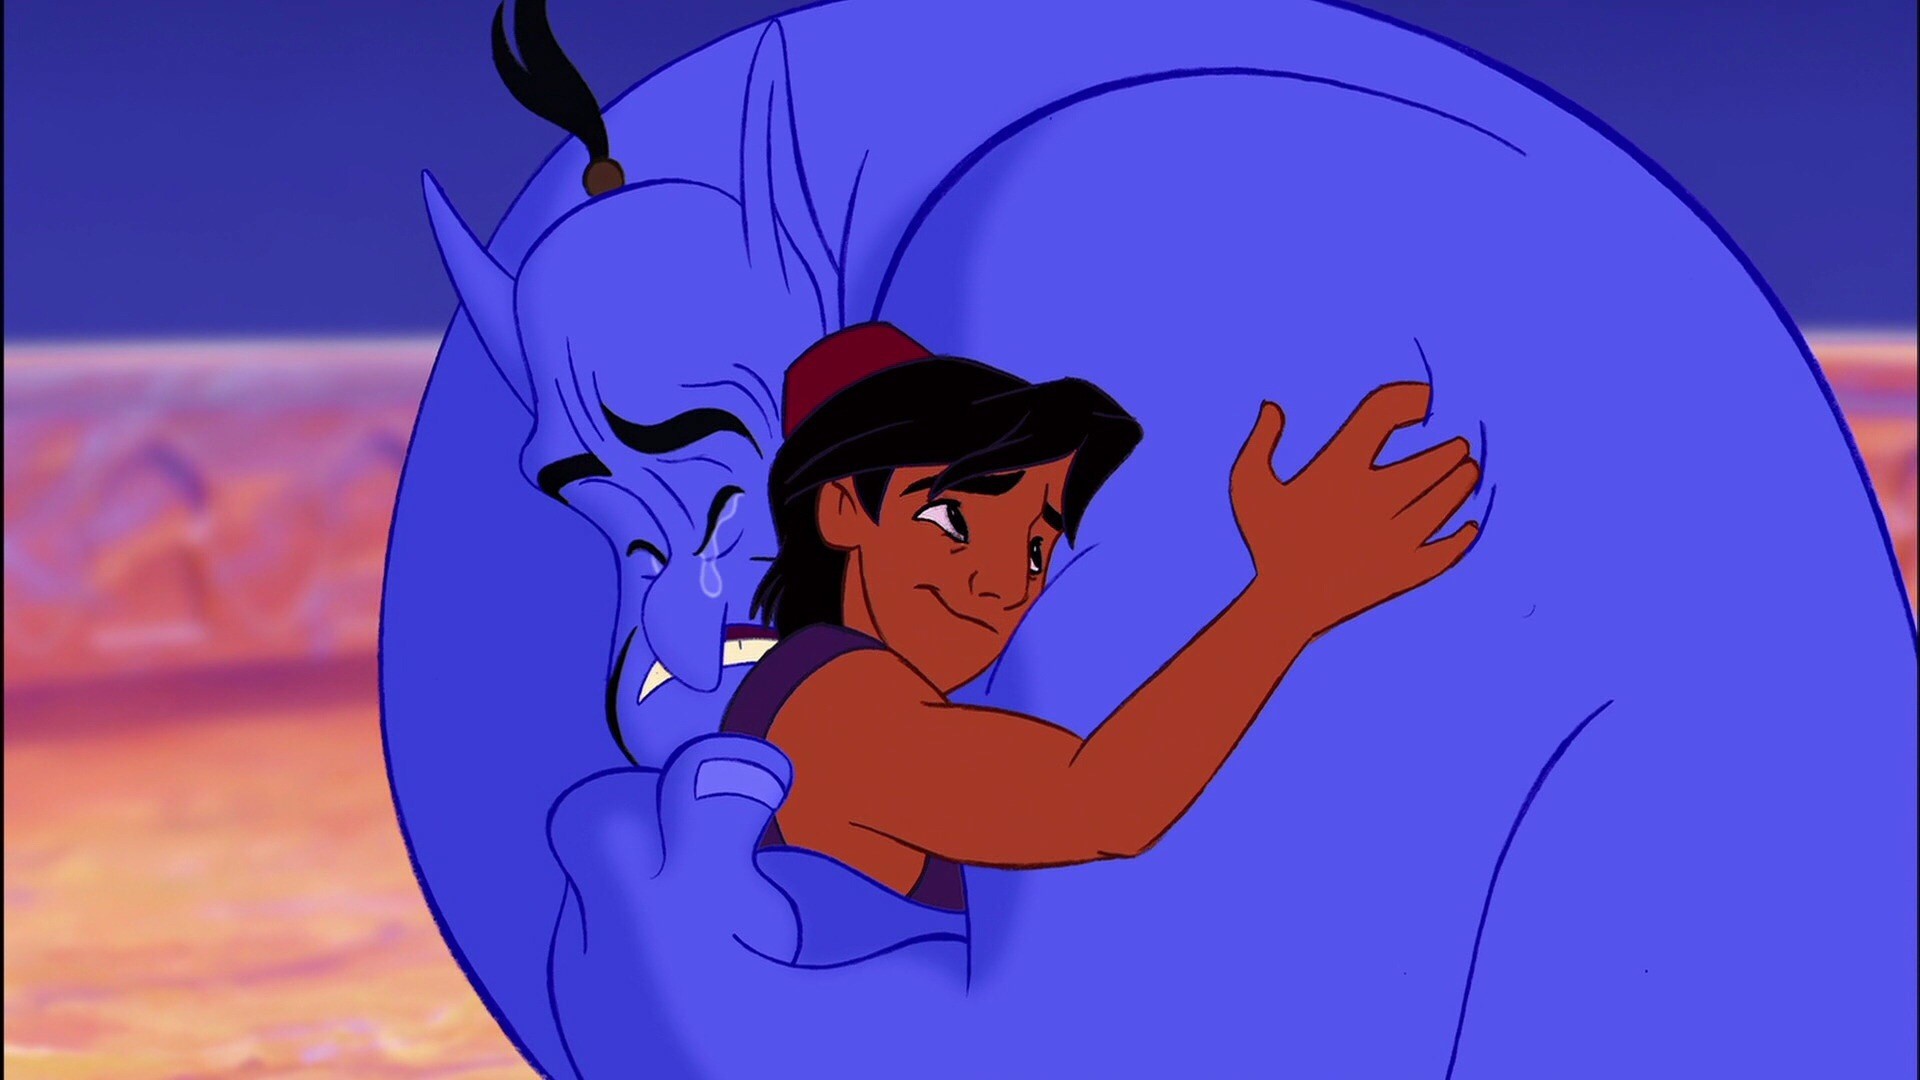 1920x1080 Aladdin to get prequel about the enslavement of the Genie | The Independent